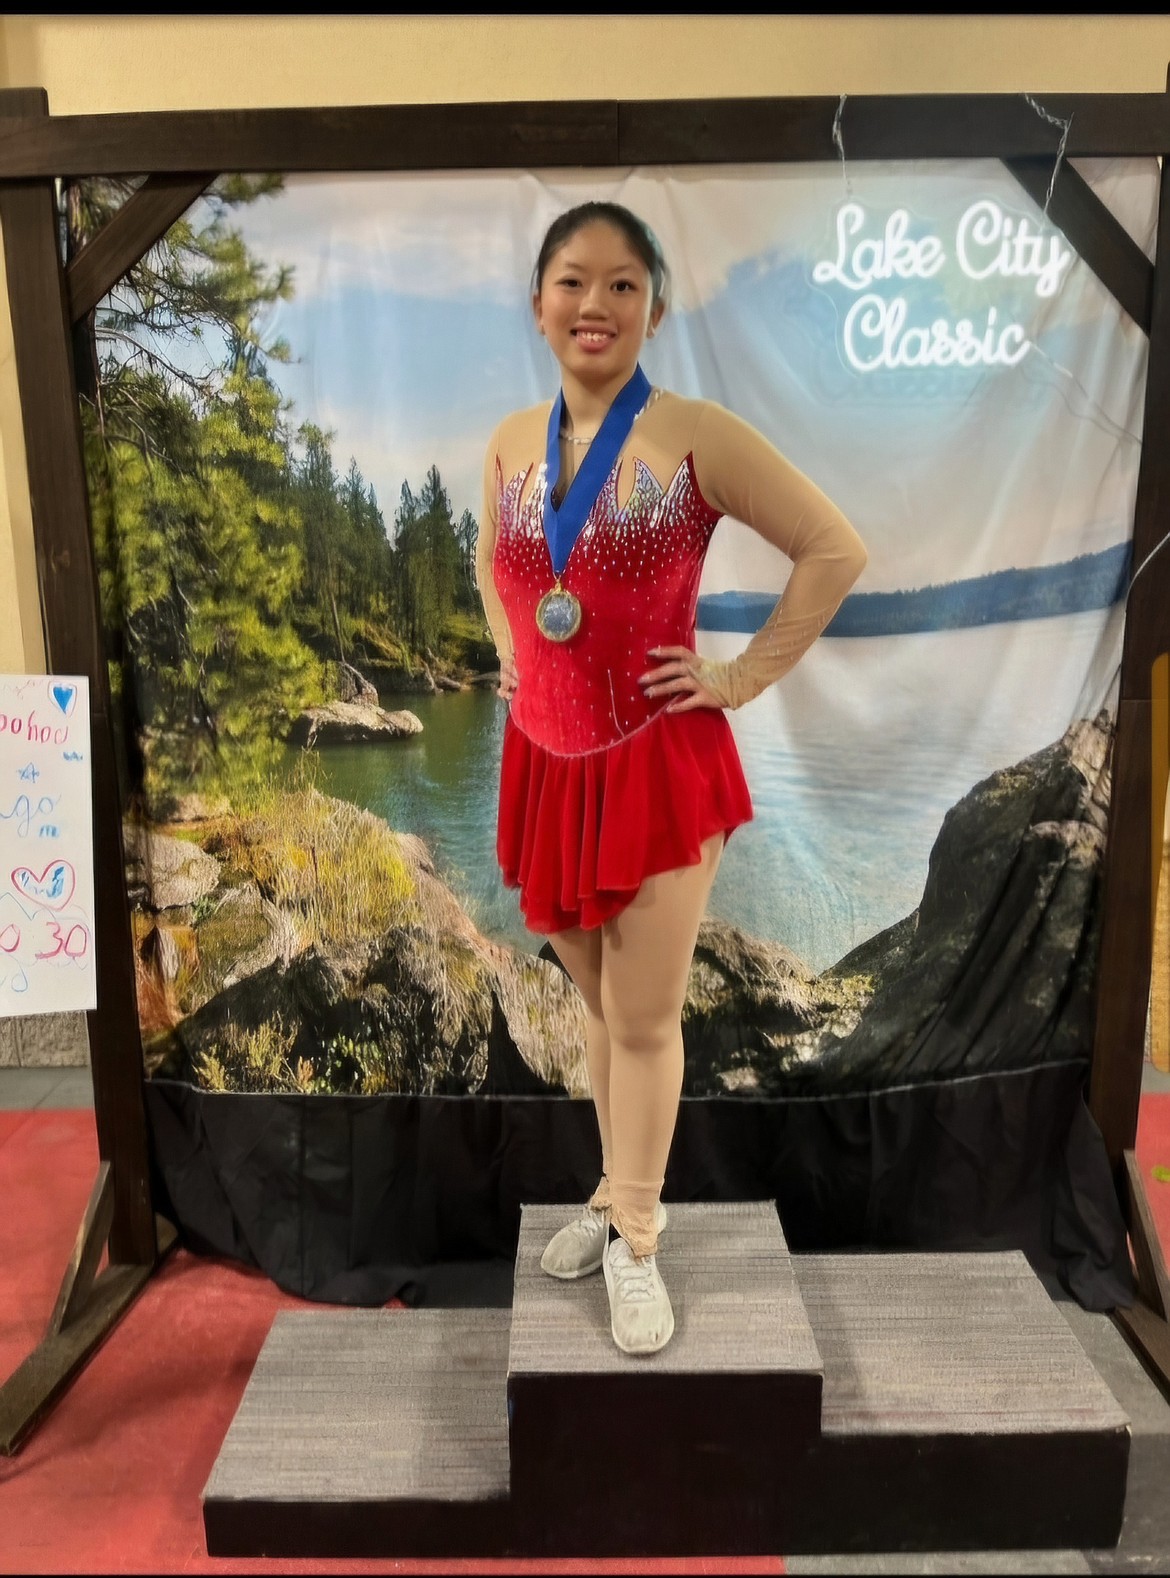 Courtesy photo 
Kilee Williams, part of the Lake City Figure Skating program of the Spokane Figure Skating Club, which hosted the Lake City Classic on May 17-19 at the Frontier Ice Arena in Coeur d'Alene.